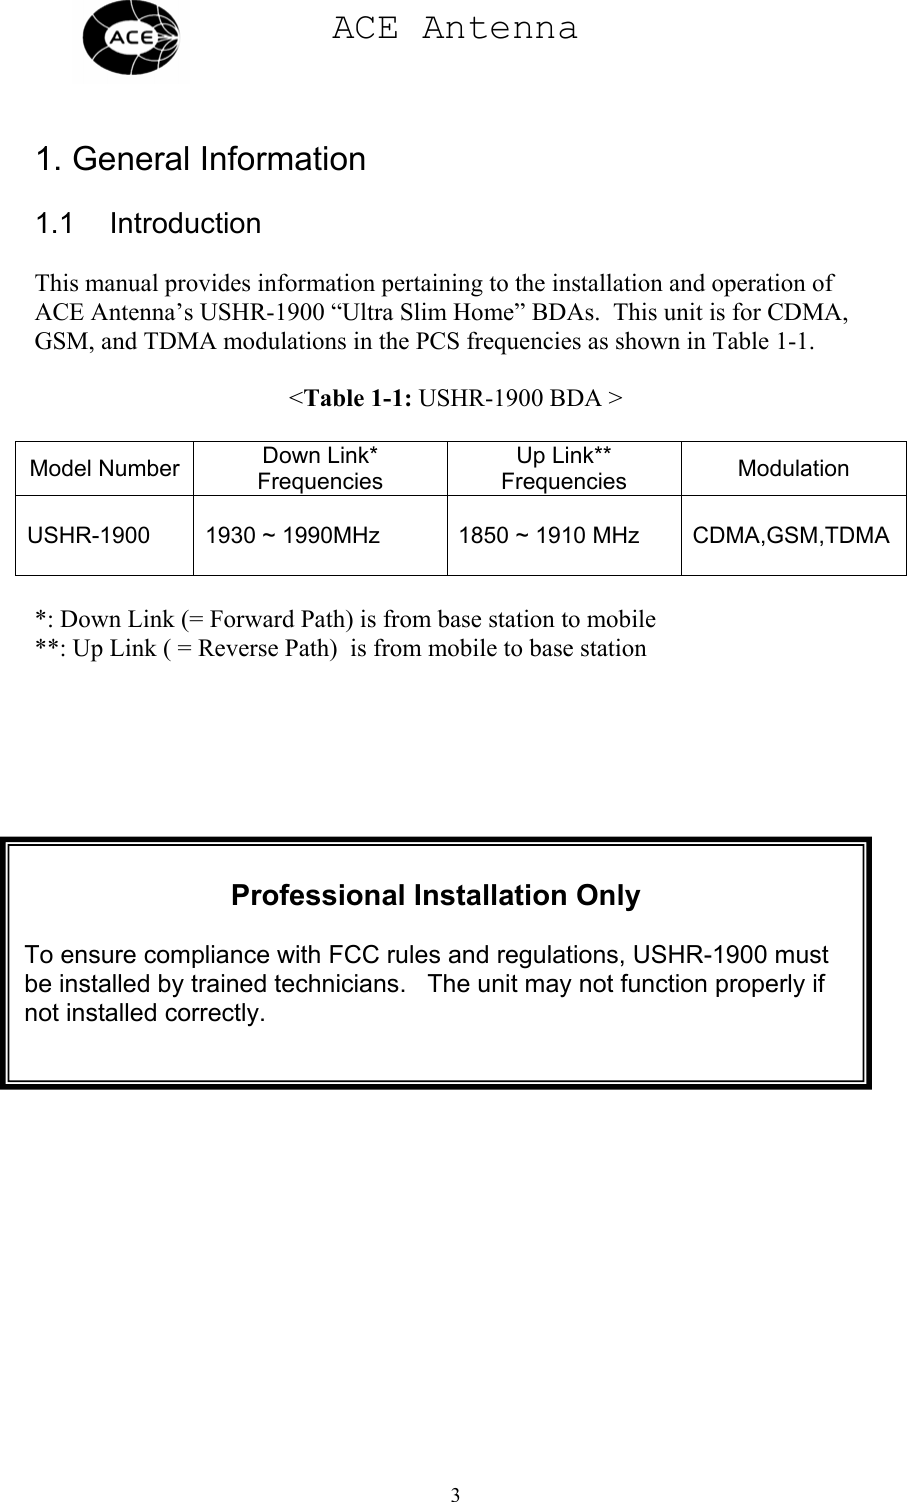 ACE Antenna  3    1. General Information  1.1 Introduction  This manual provides information pertaining to the installation and operation of ACE Antenna’s USHR-1900 “Ultra Slim Home” BDAs.  This unit is for CDMA, GSM, and TDMA modulations in the PCS frequencies as shown in Table 1-1.  &lt;Table 1-1: USHR-1900 BDA &gt;  Model Number  Down Link* Frequencies Up Link** Frequencies  Modulation  USHR-1900  1930 ~ 1990MHz  1850 ~ 1910 MHz  CDMA,GSM,TDMA  *: Down Link (= Forward Path) is from base station to mobile **: Up Link ( = Reverse Path)  is from mobile to base stationProfessional Installation Only  To ensure compliance with FCC rules and regulations, USHR-1900 must be installed by trained technicians.   The unit may not function properly if not installed correctly. 